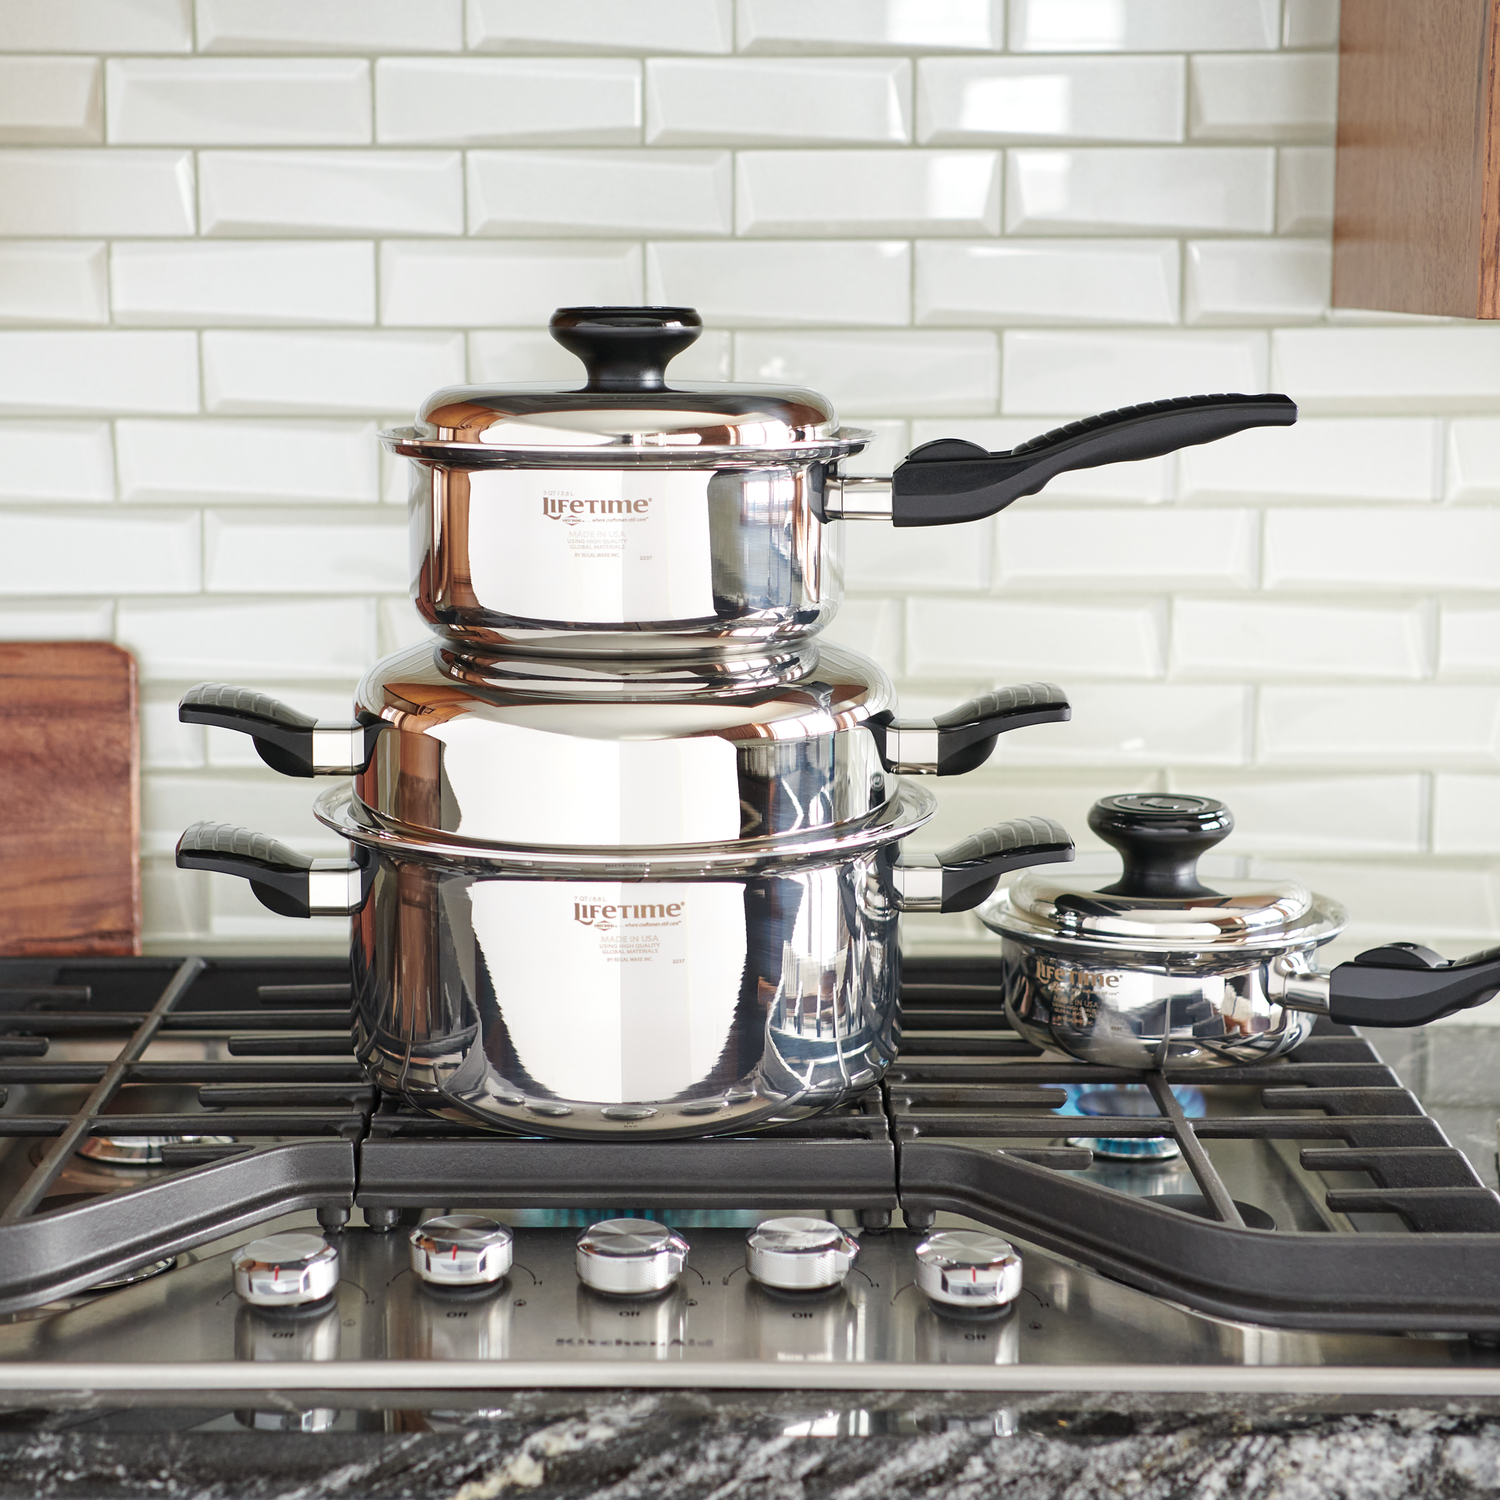 Three Lifetime Cookware Pots Stacked on a Stovetop